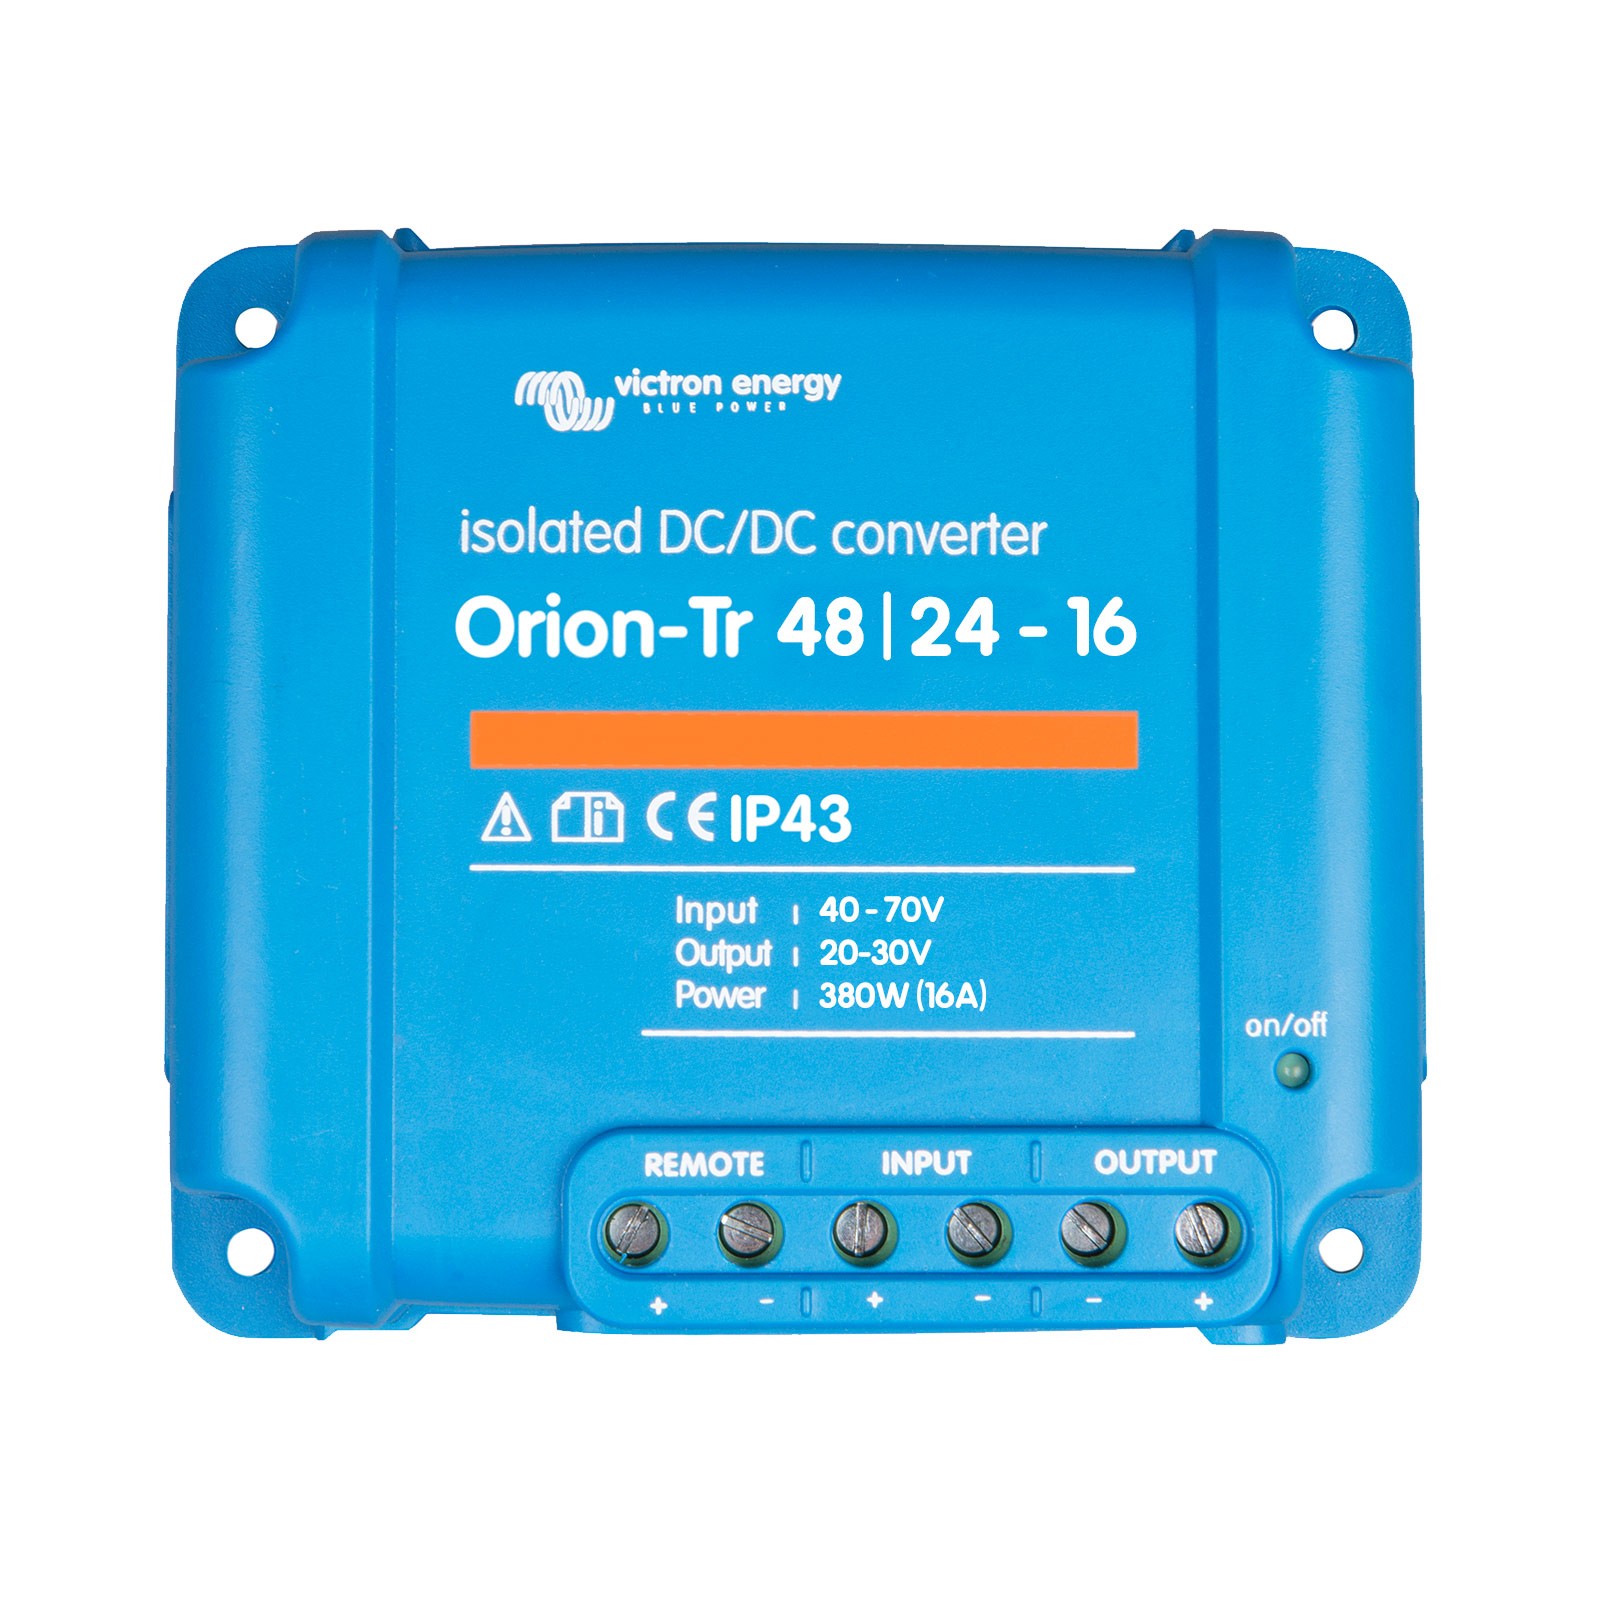 Isolierter Konverter Orion-Tr 48/24-16 A Victron Energy